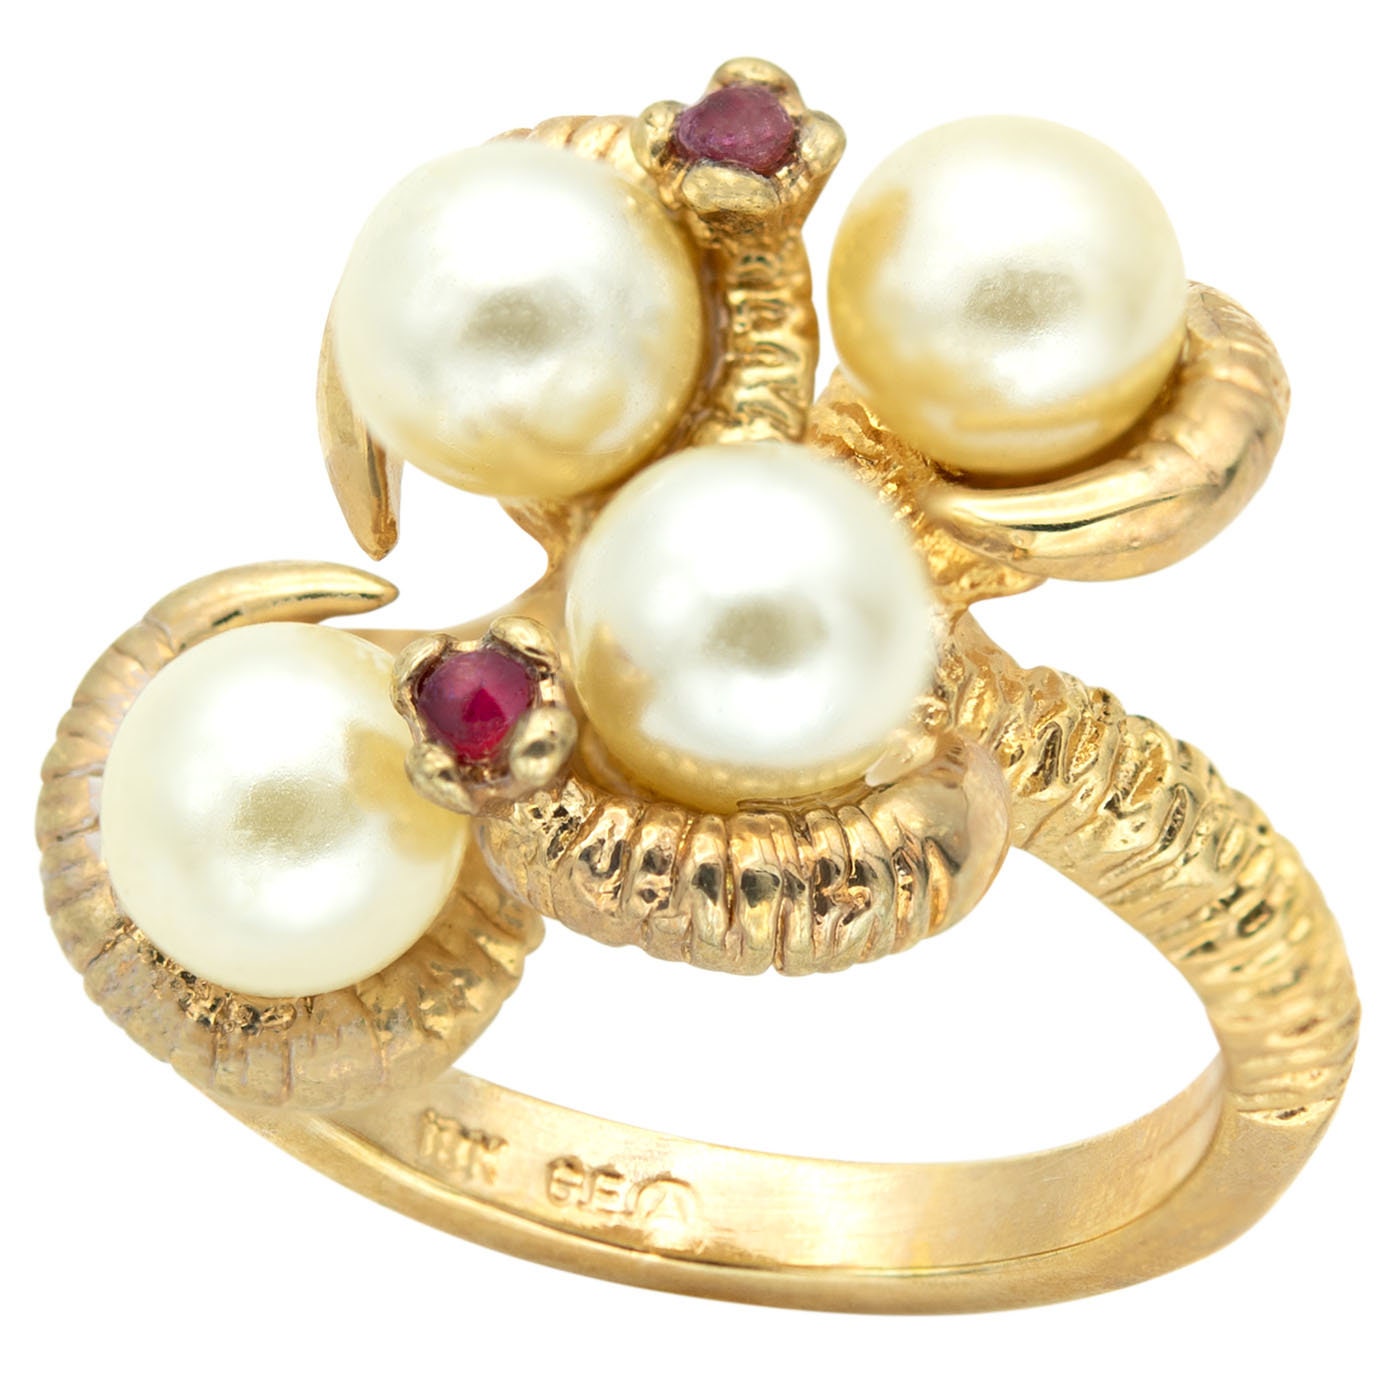 A Vintage Pearl Beads with Genuine Ruby Accents 18k Gold Electroplated Made in USA #R768